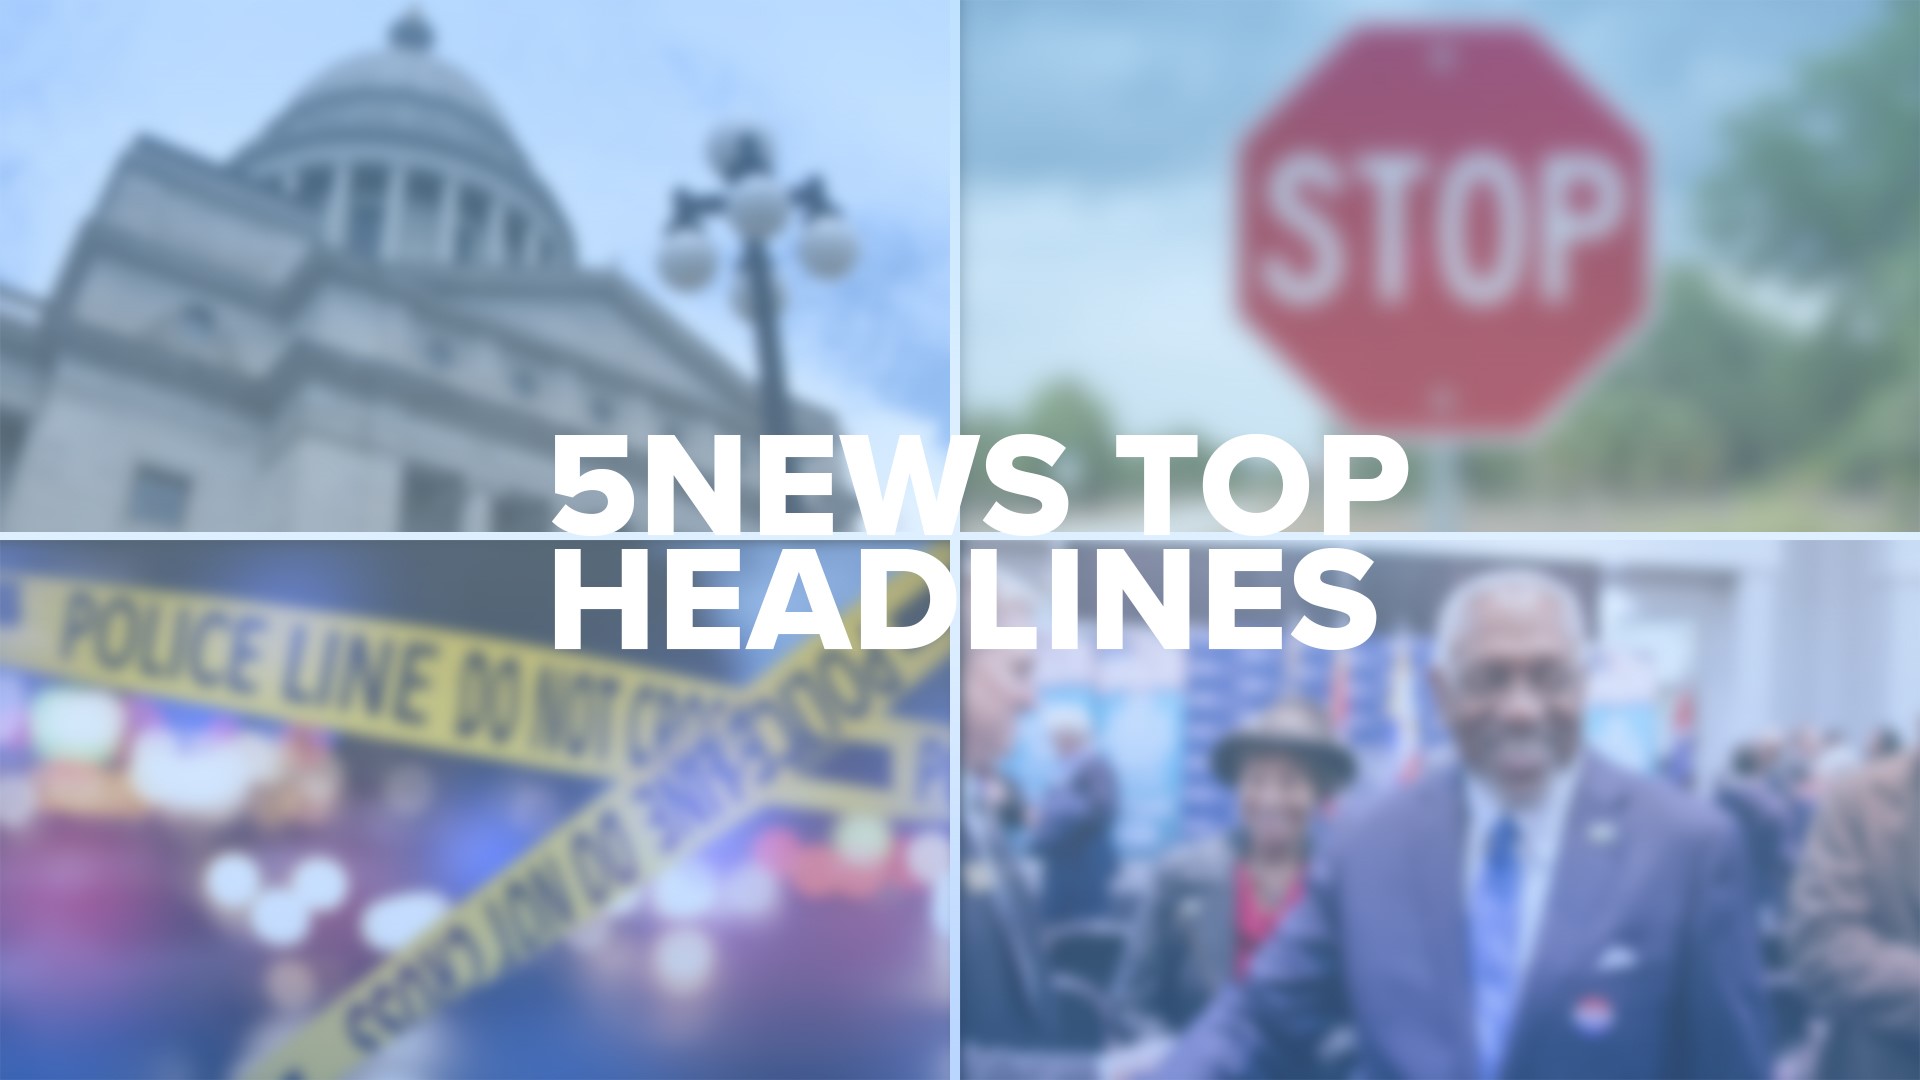 Check out today's top headlines for local news across our area! 📰